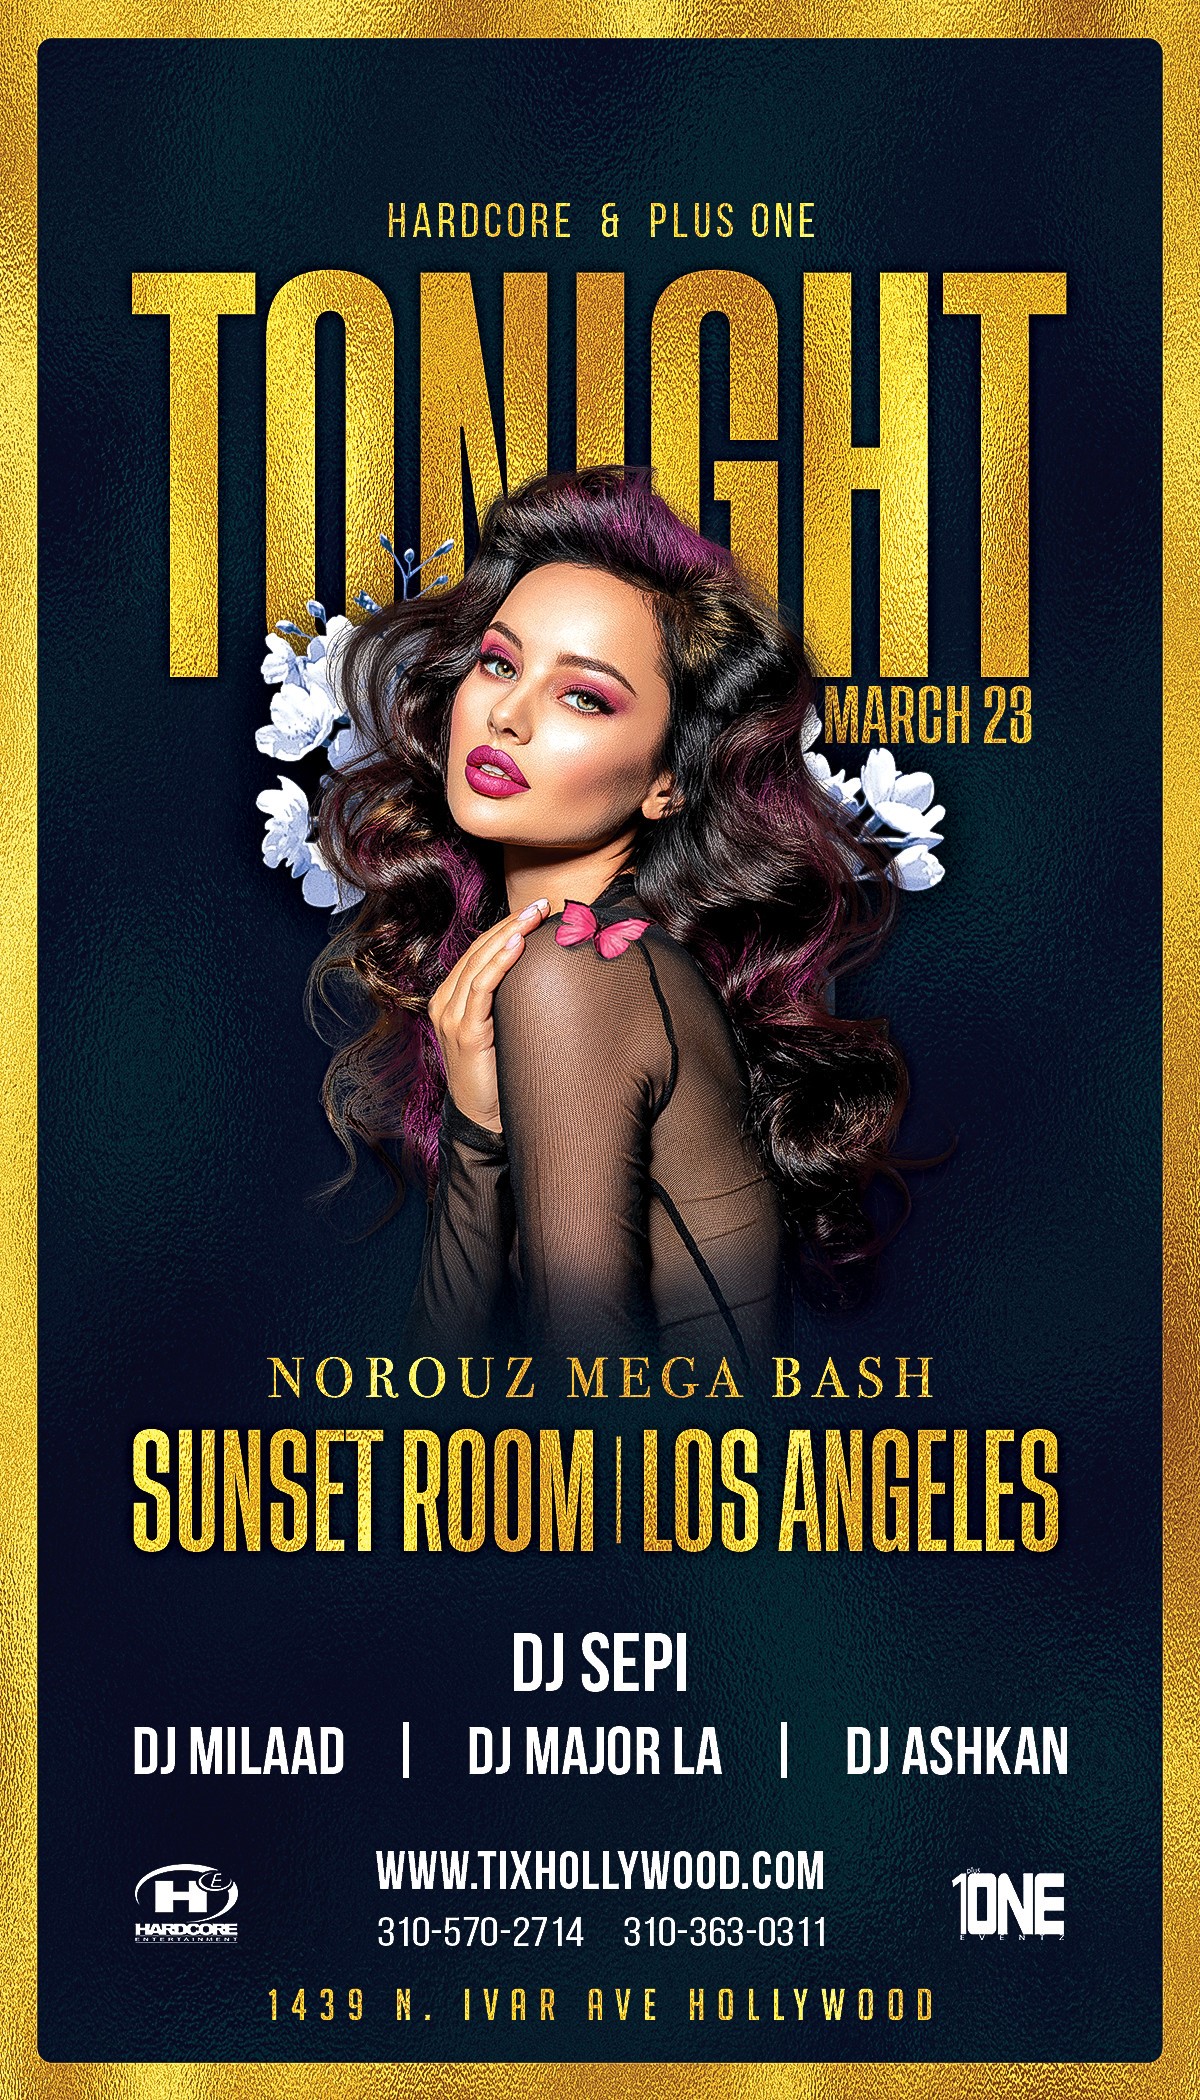 Norouz Mega Bash in Los Angeles @ SUNSET ROOM Nightclub! Saturday, March 23, 2024 on Mar 23, 22:00@Sunset Room - Buy tickets and Get information on HARDCORE & PLUS ONE 